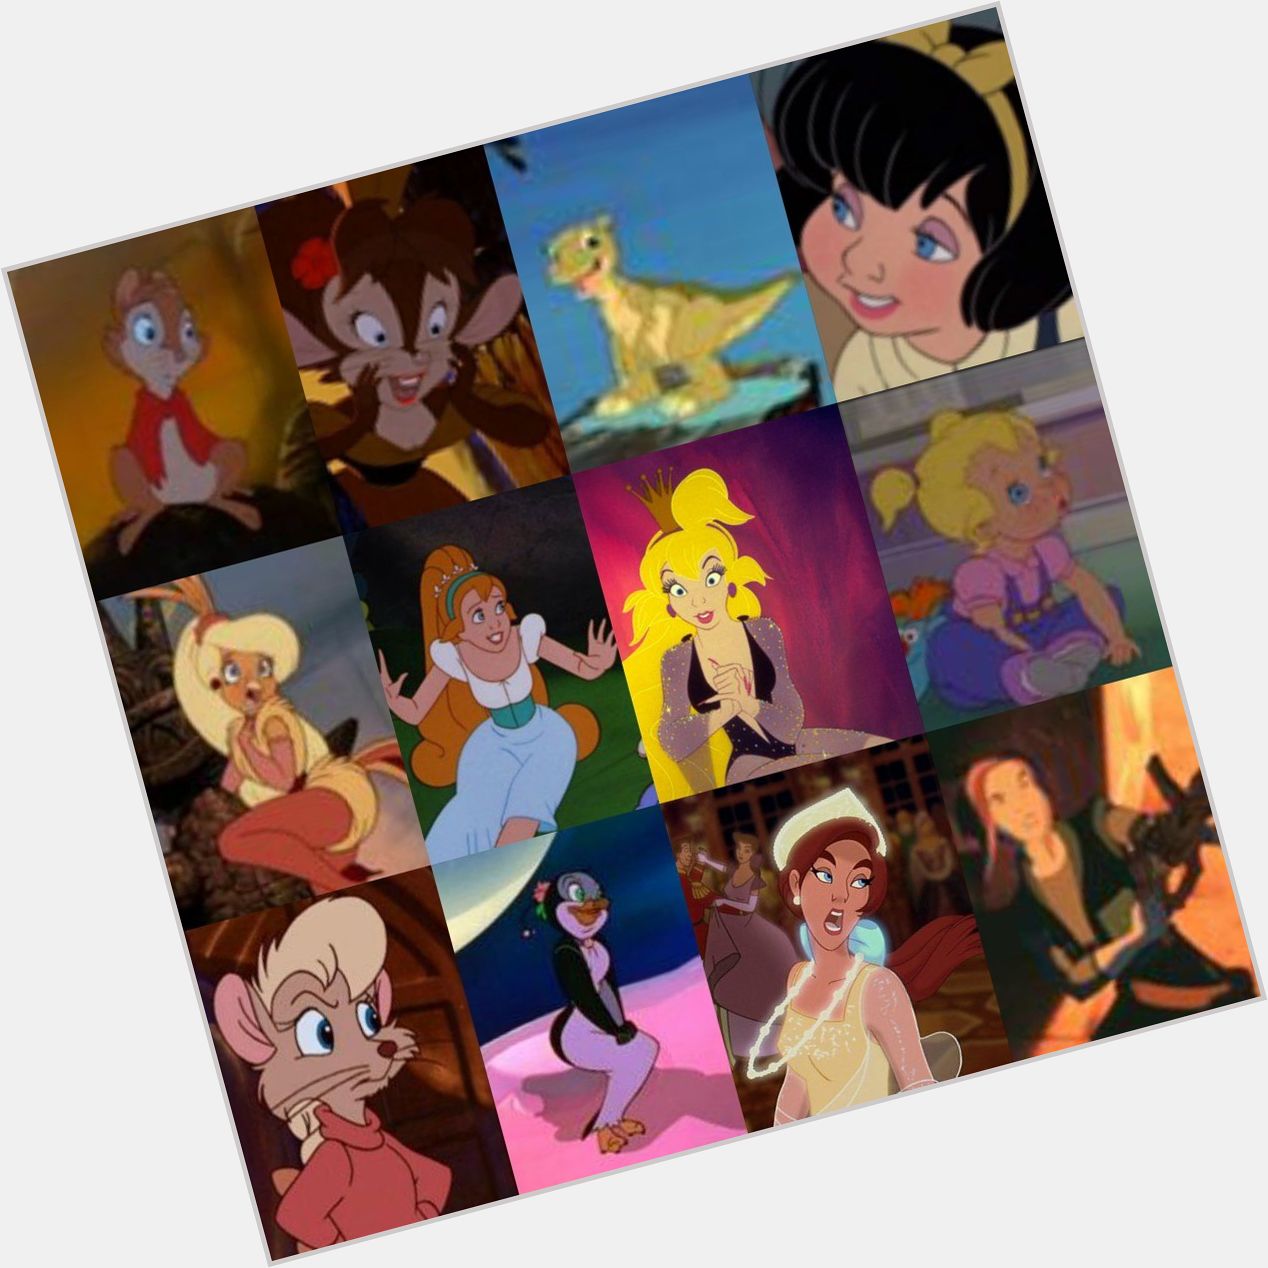 Http://fanpagepress.net/m/D/Don Bluth Dating 2